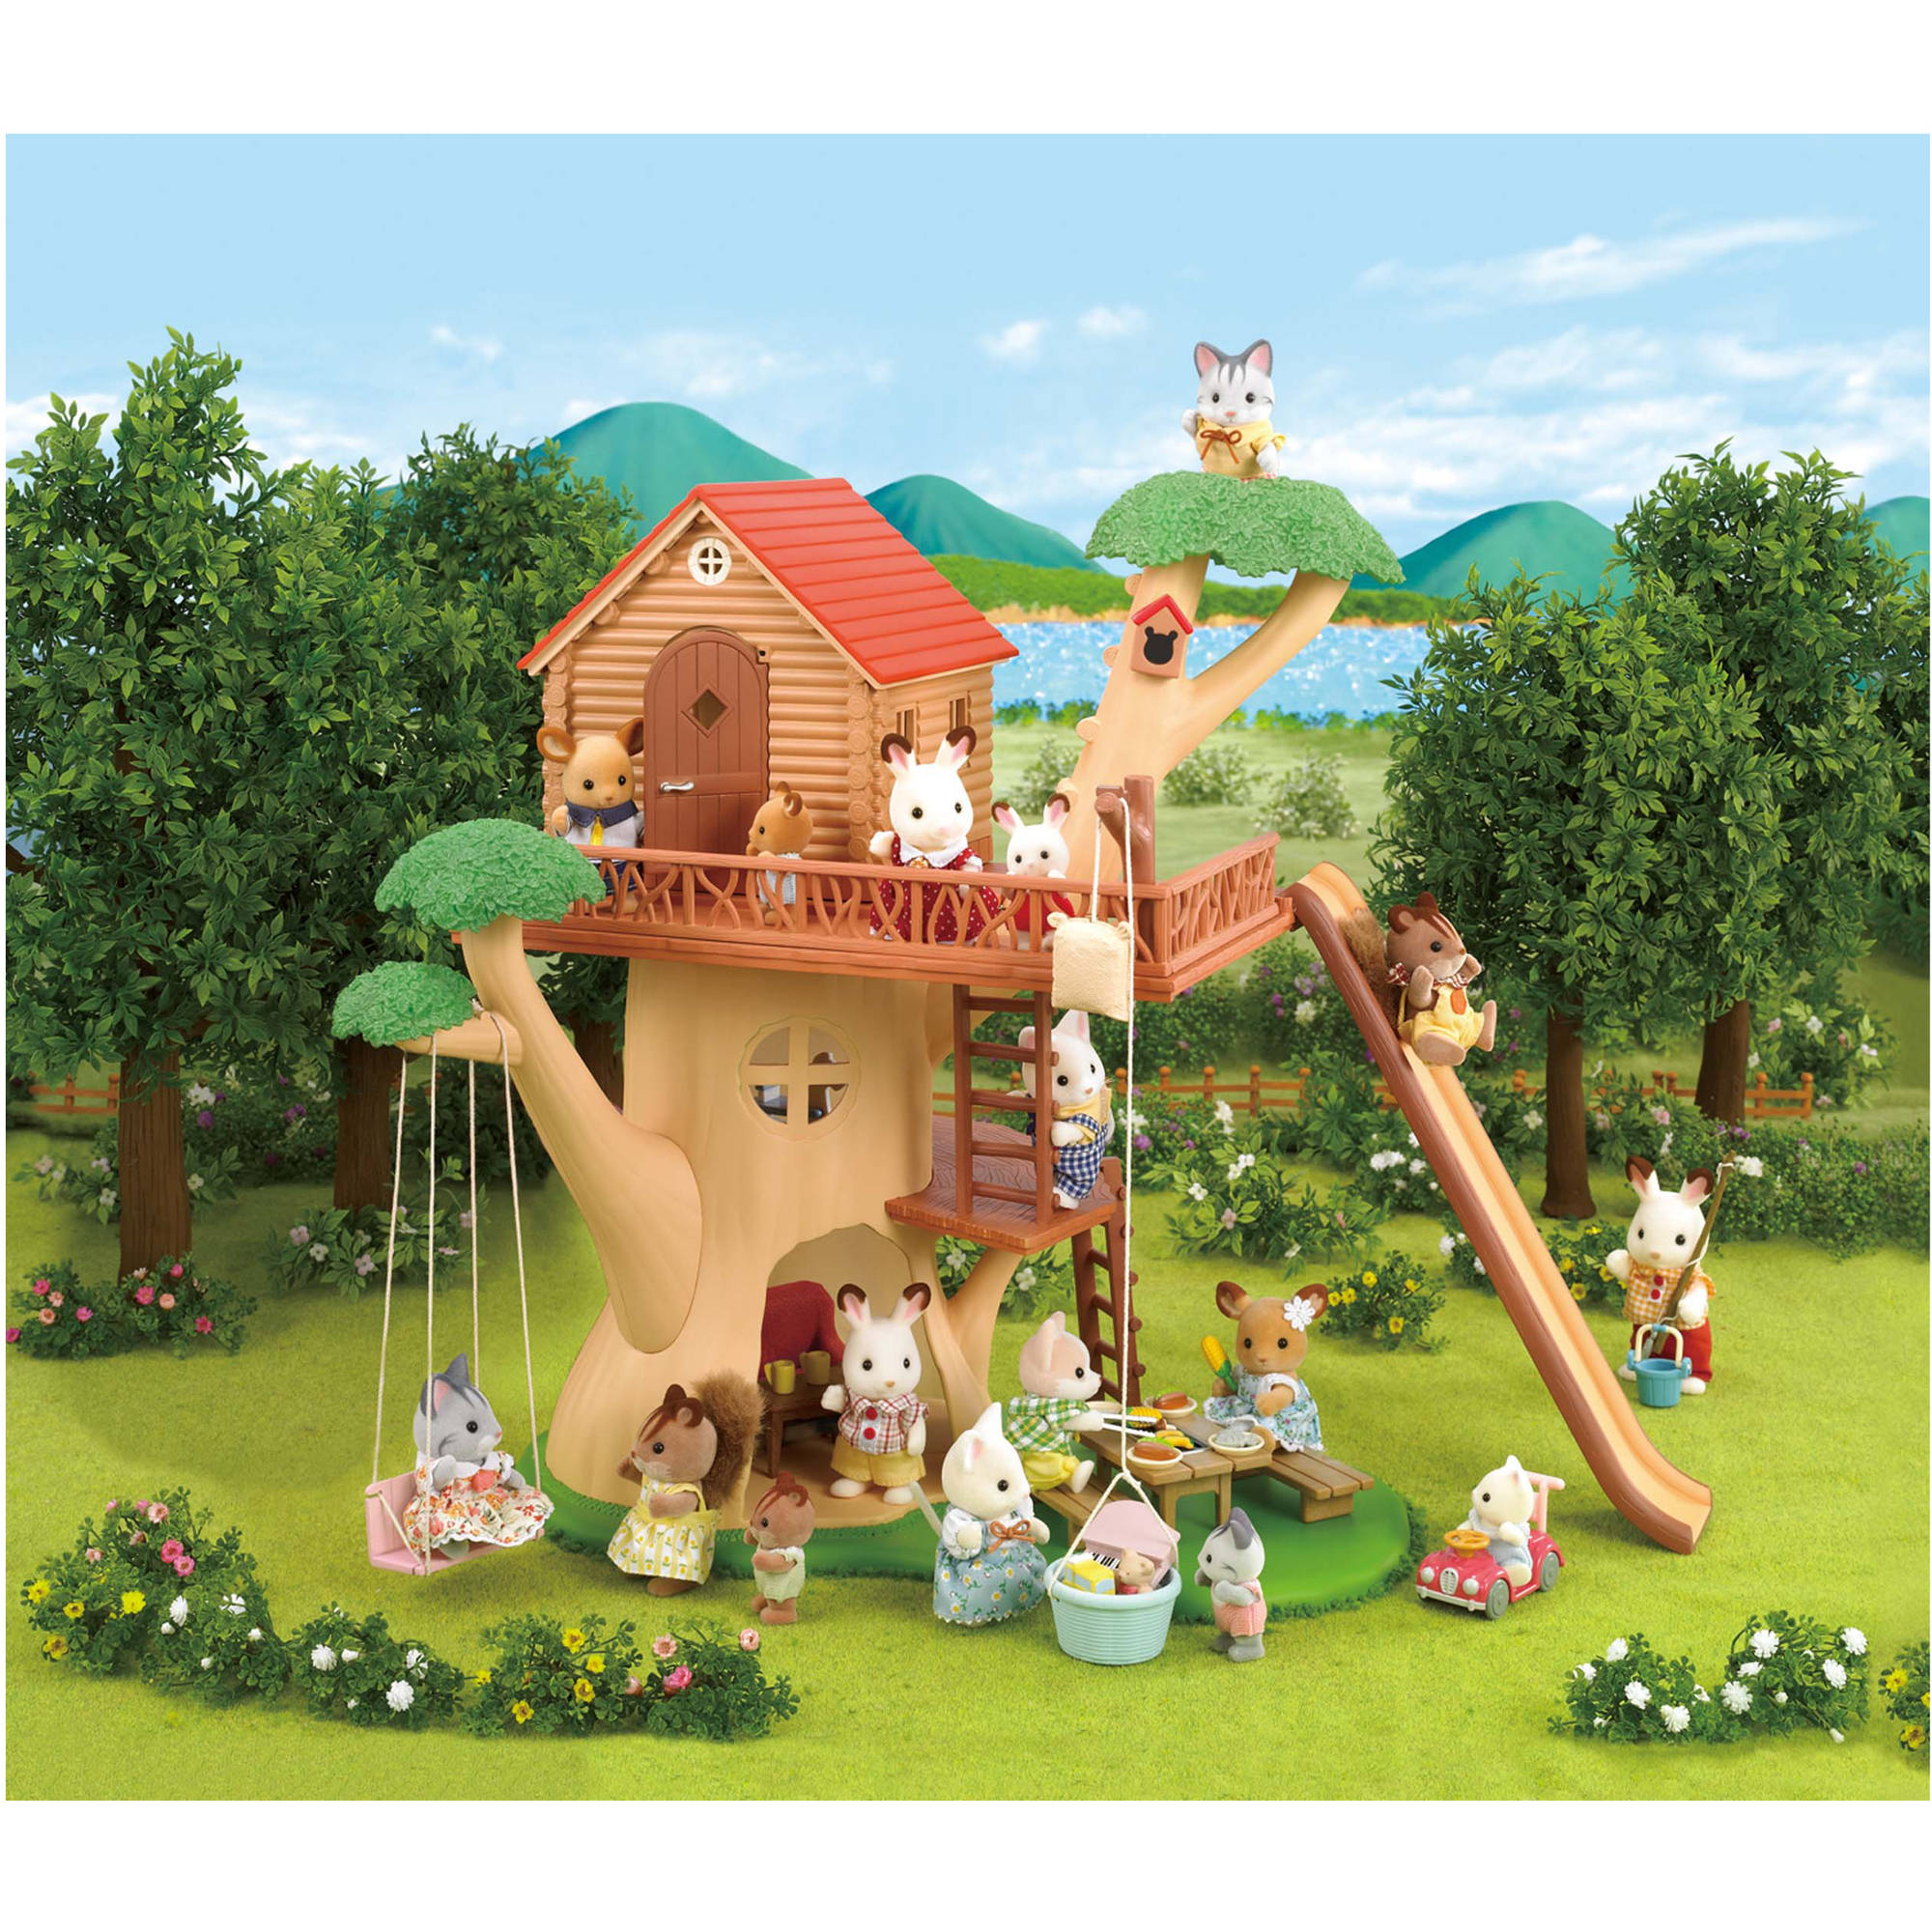 Calico Critters Adventure Tree House Only $30.74! (Reg $69.95)